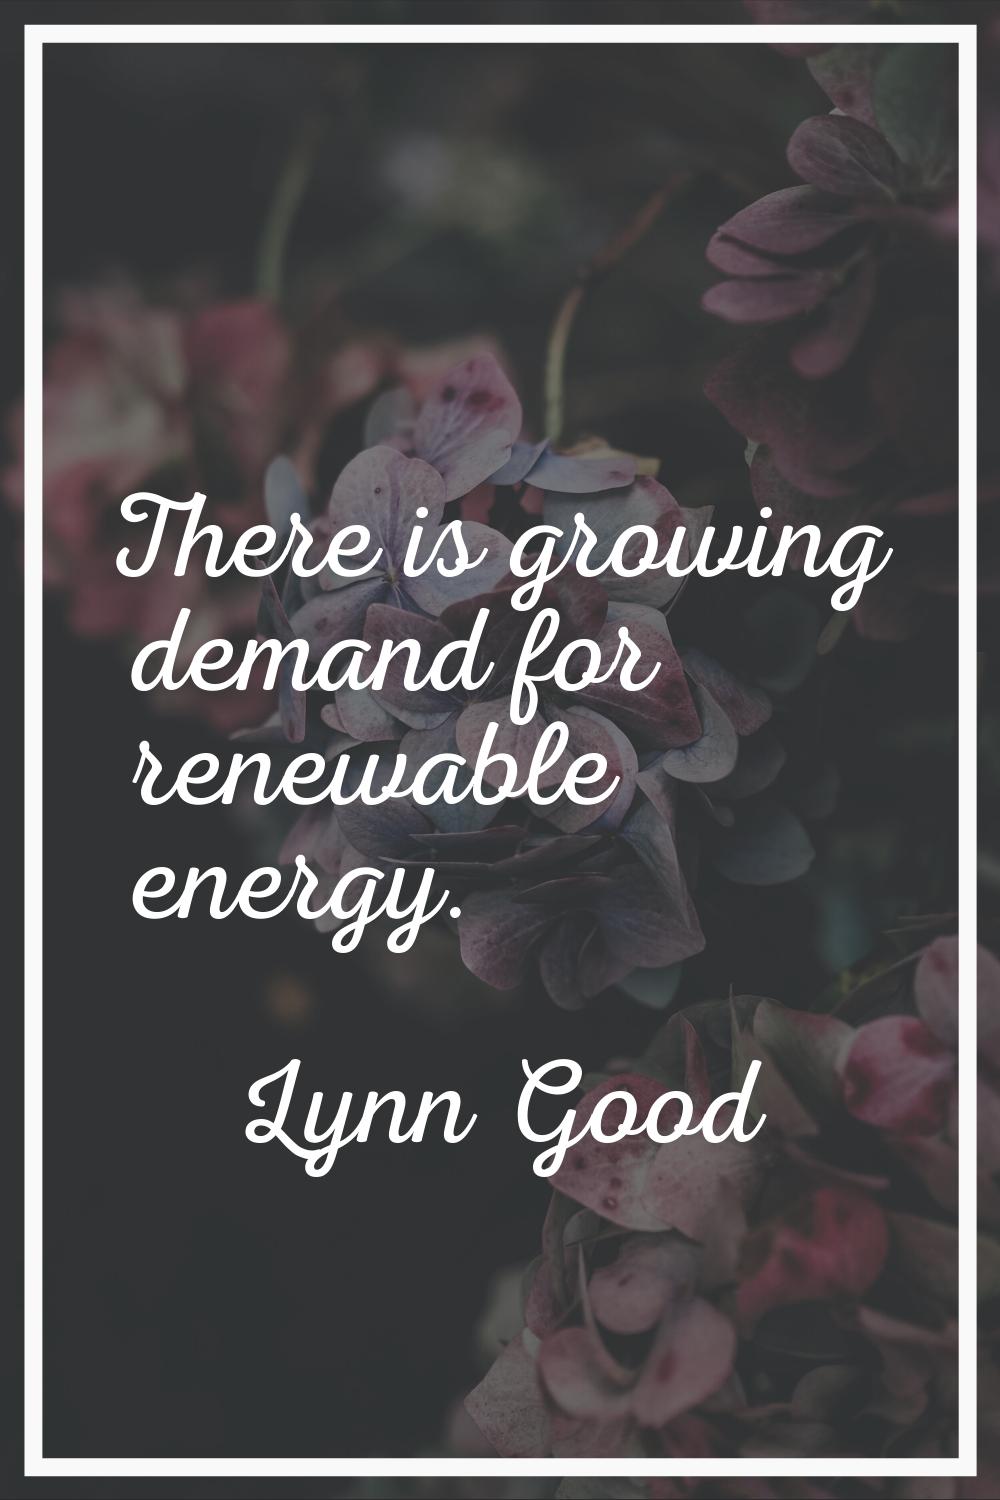 There is growing demand for renewable energy.